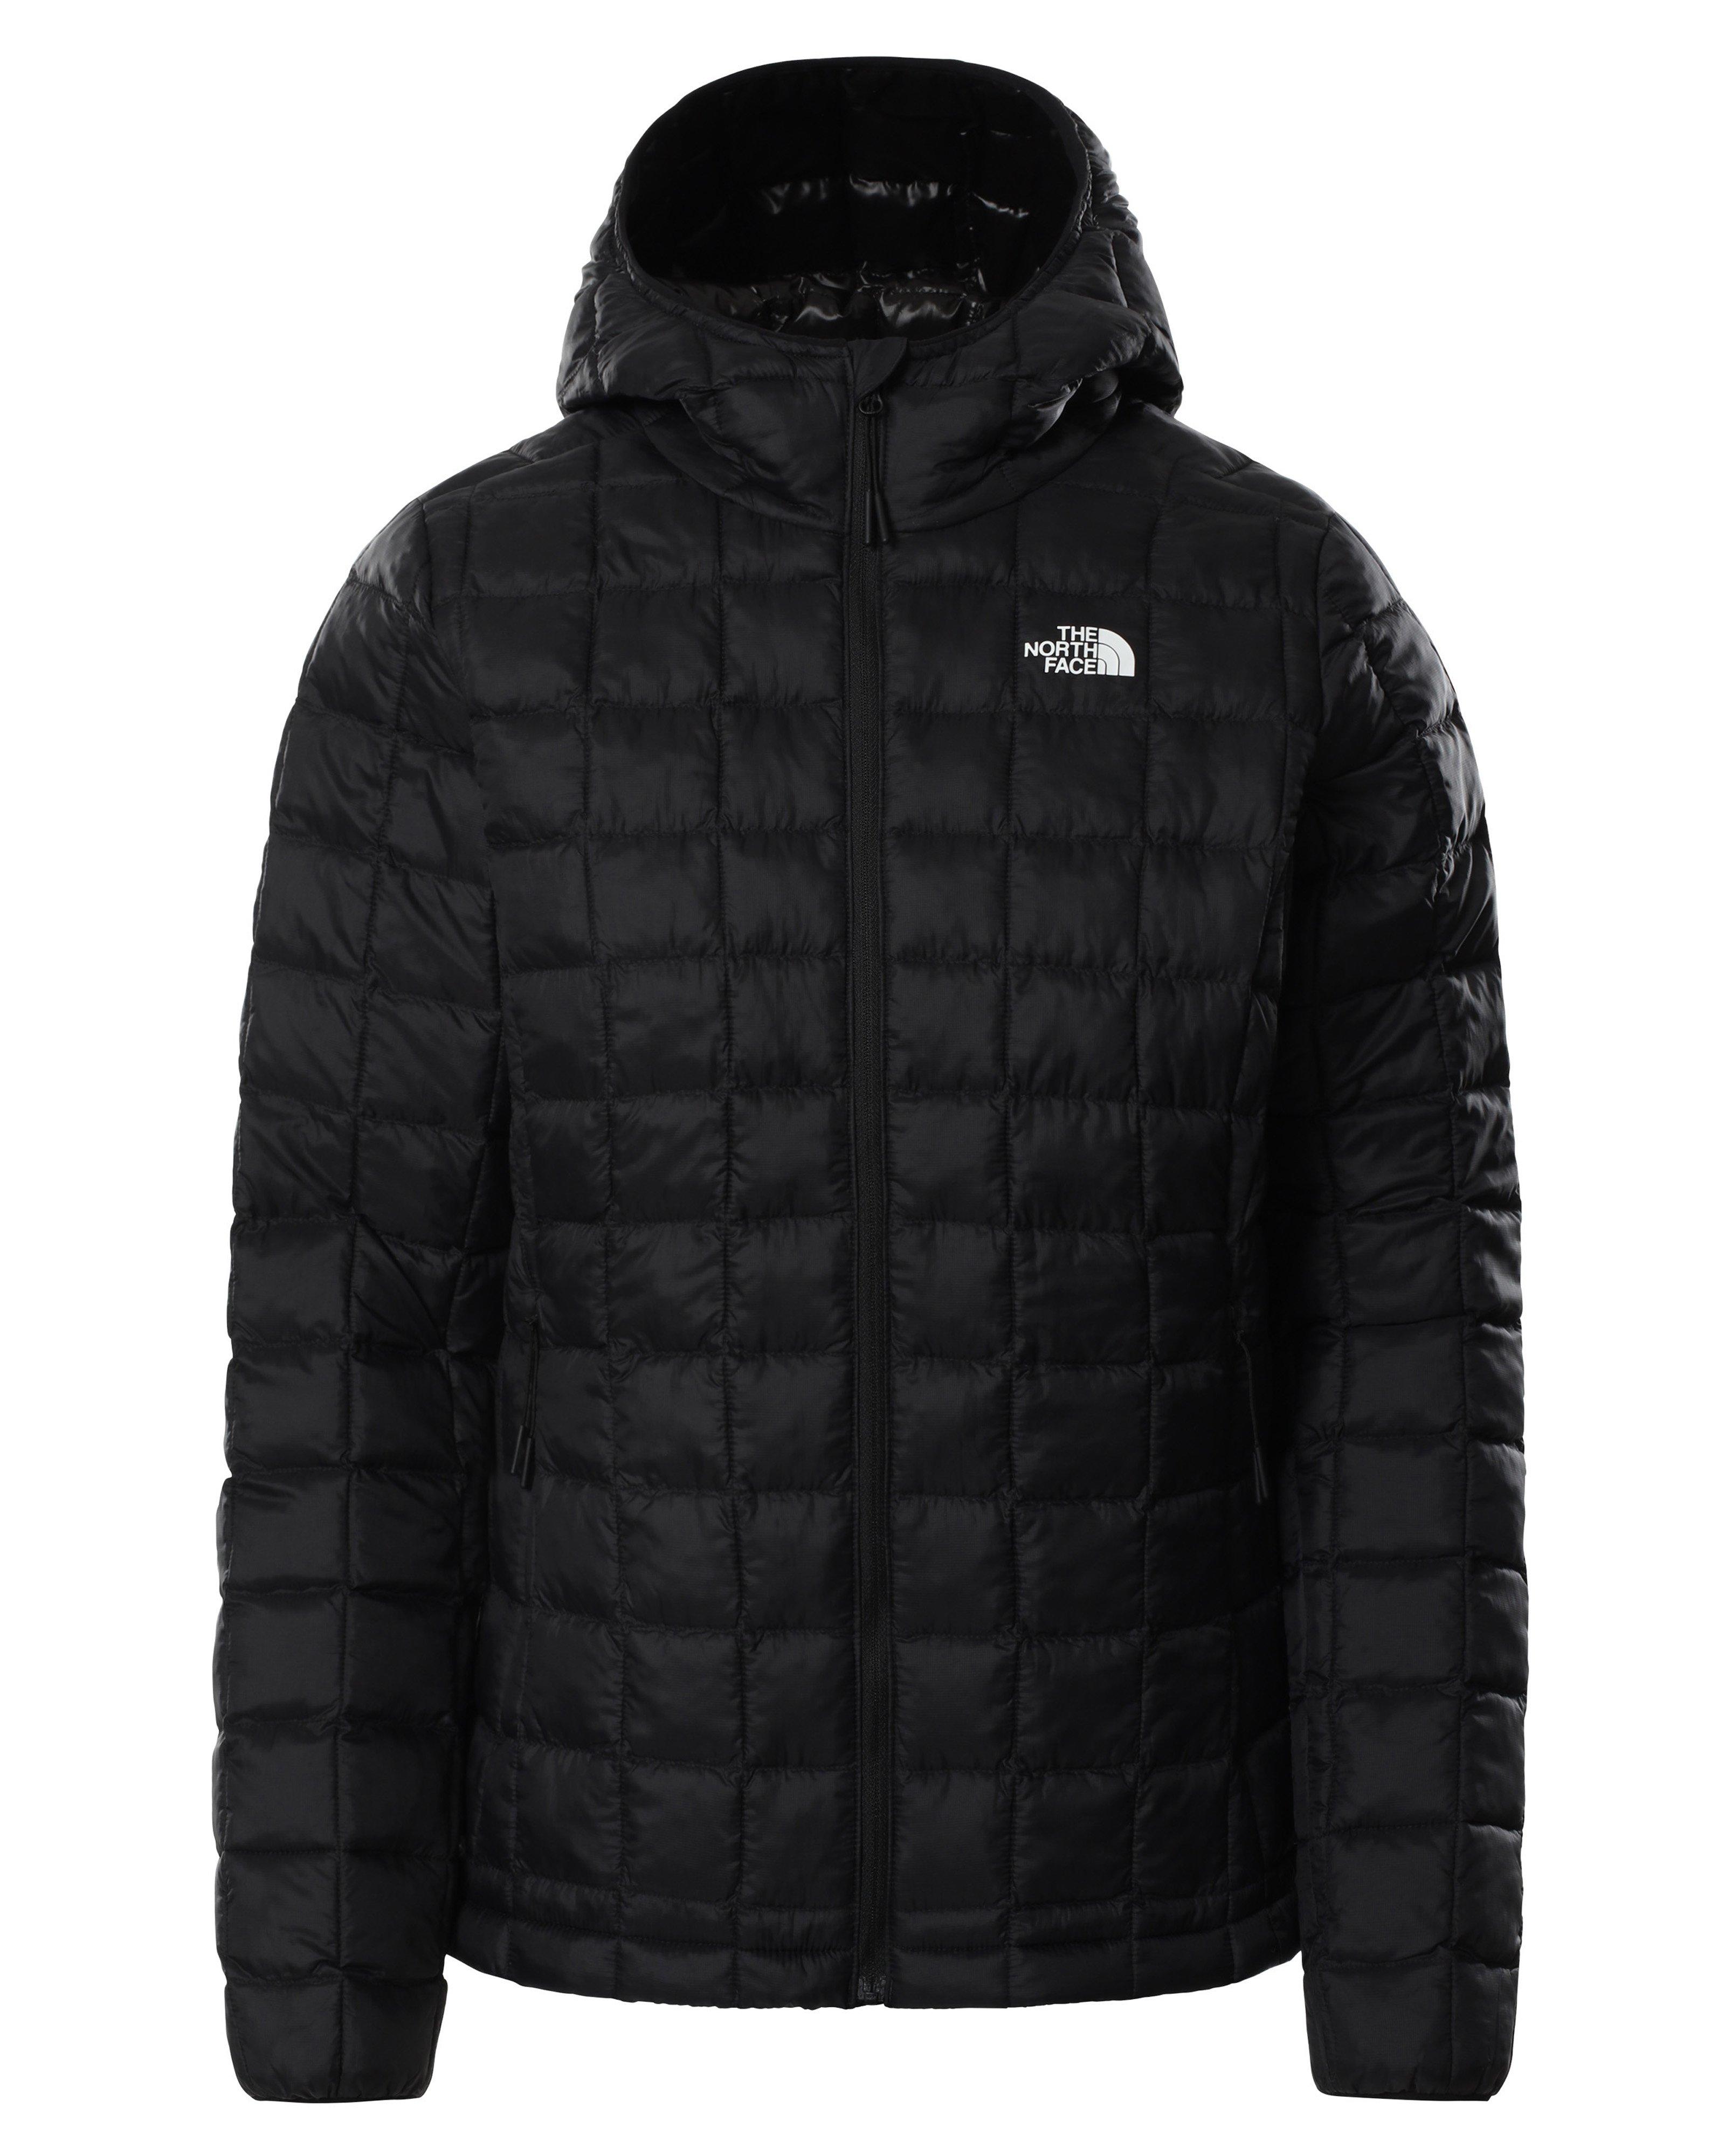 The North Face Women’s ThermoBall™ Eco Hoodie